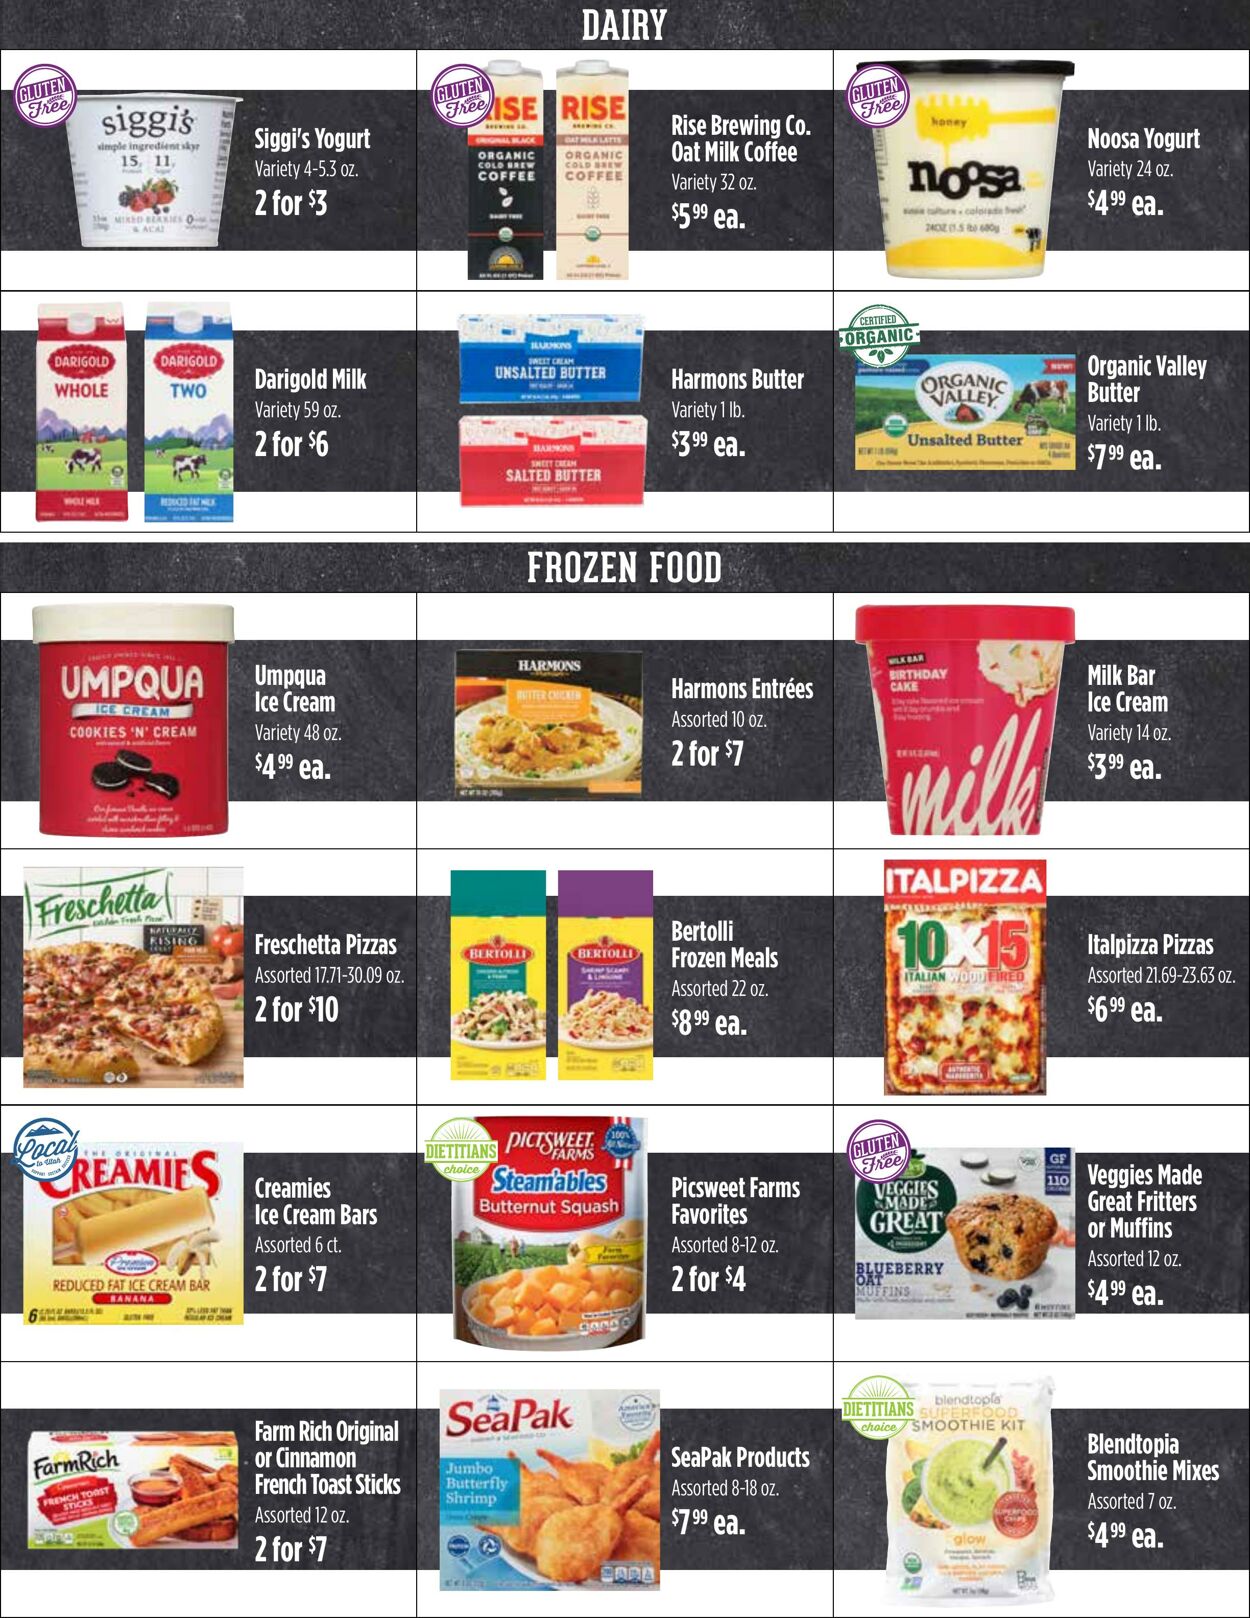 Weekly ad Harmons Grocery 05/16/2023 - 05/22/2023